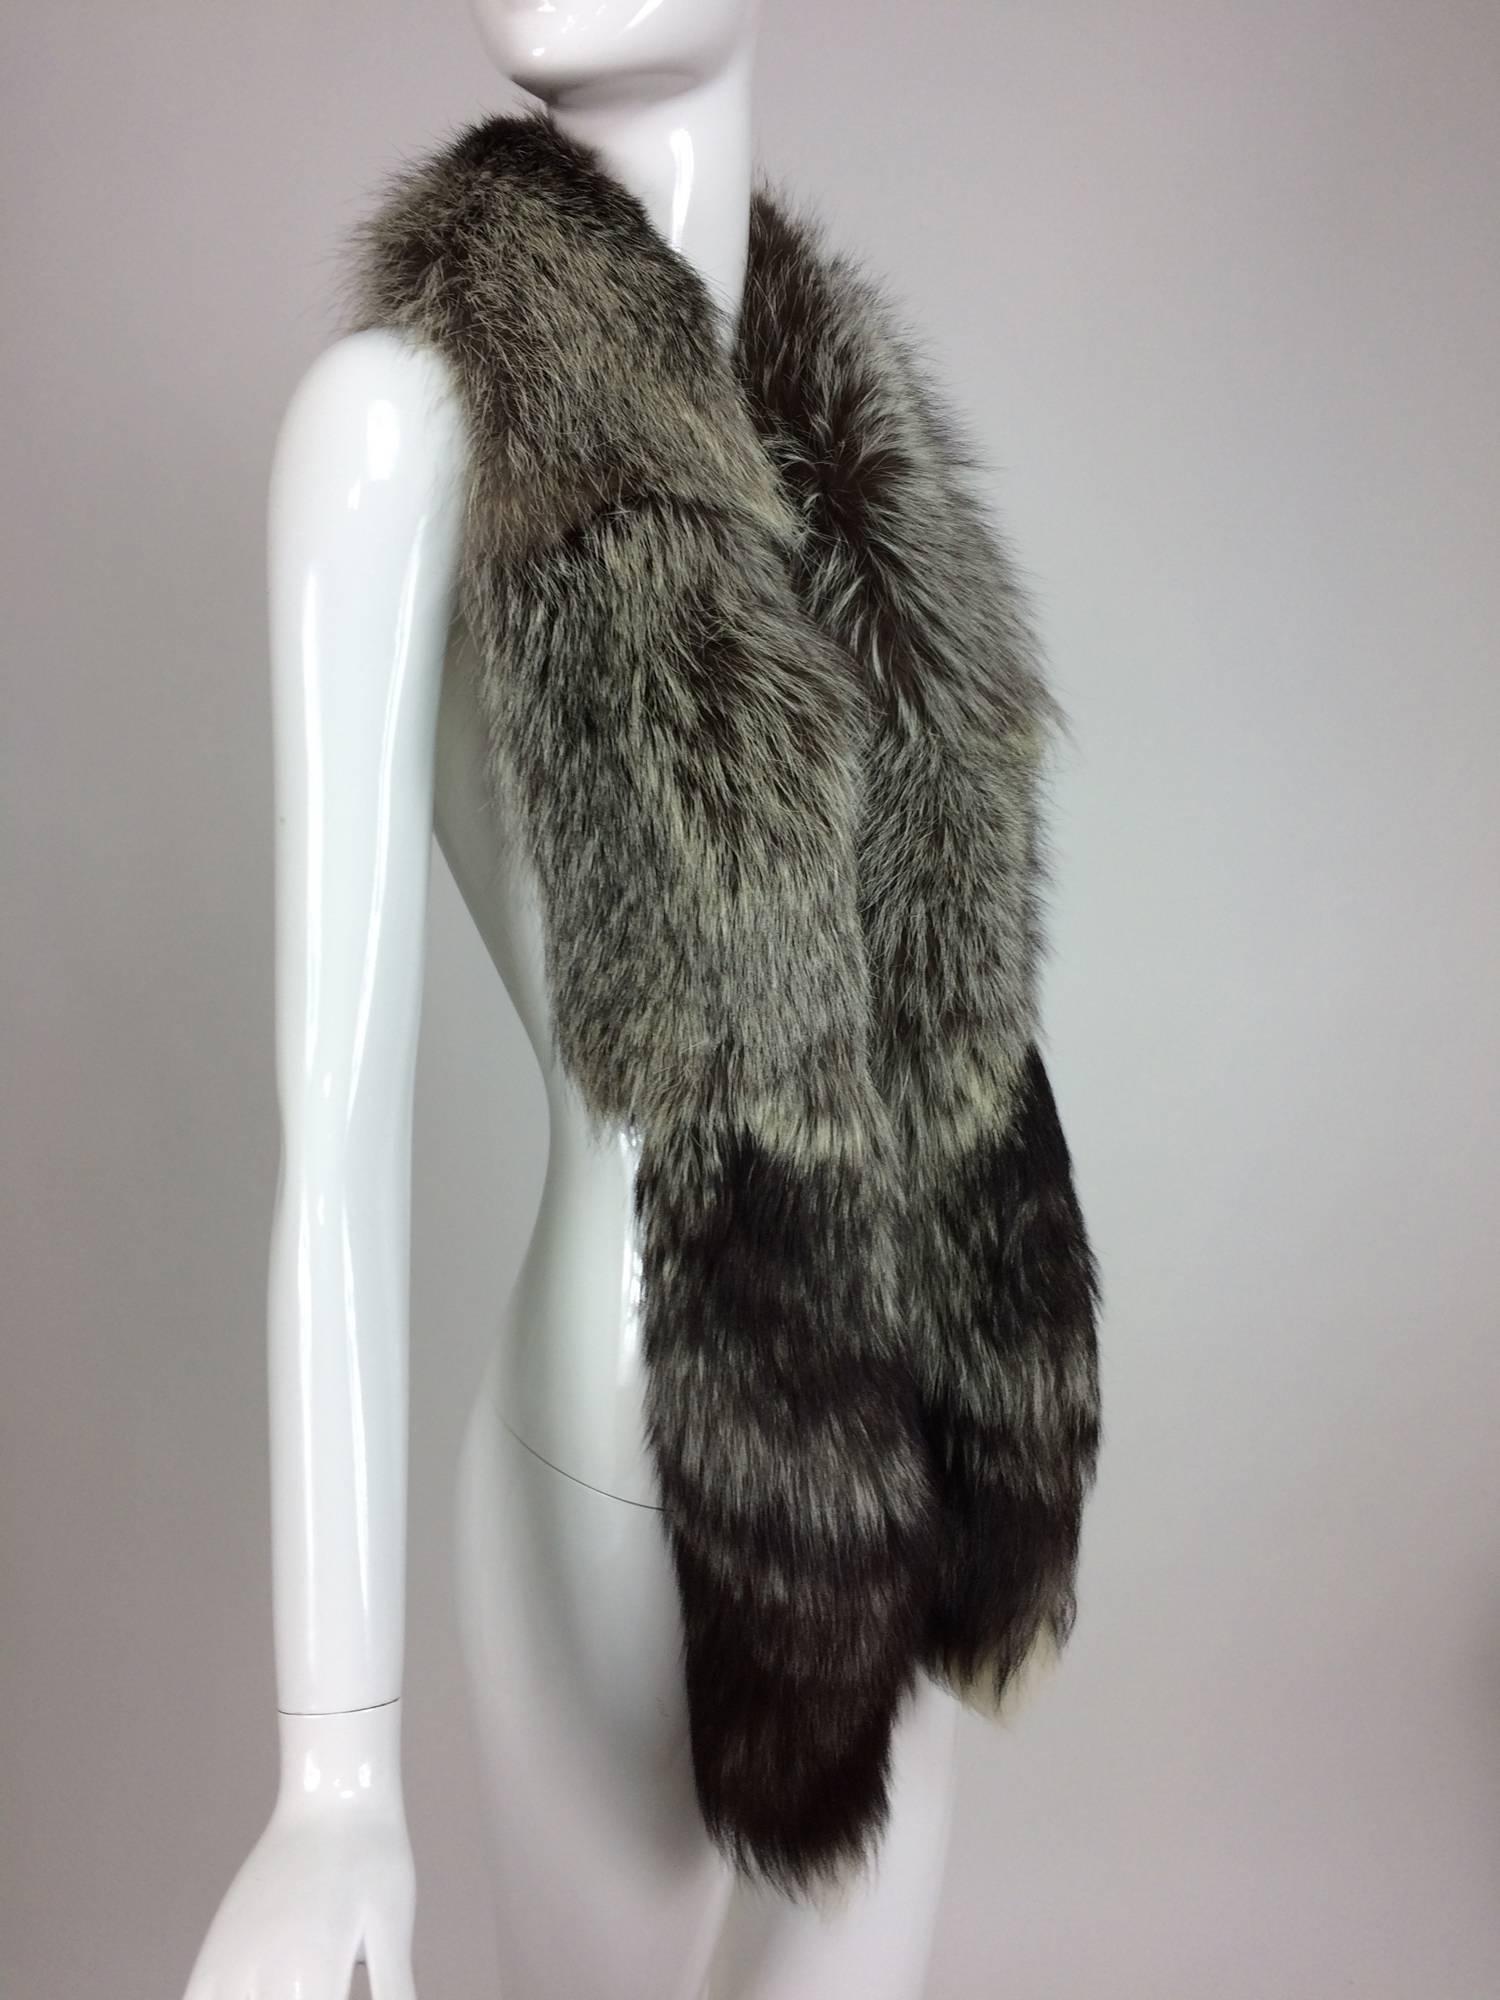 Beautiful silver fox long scarf with tails at each end...Full warm silvery fur...Lined in black velvet...1960s

In excellent wearable condition... All our clothing is dry cleaned and inspected for condition and is ready to wear...Any condition